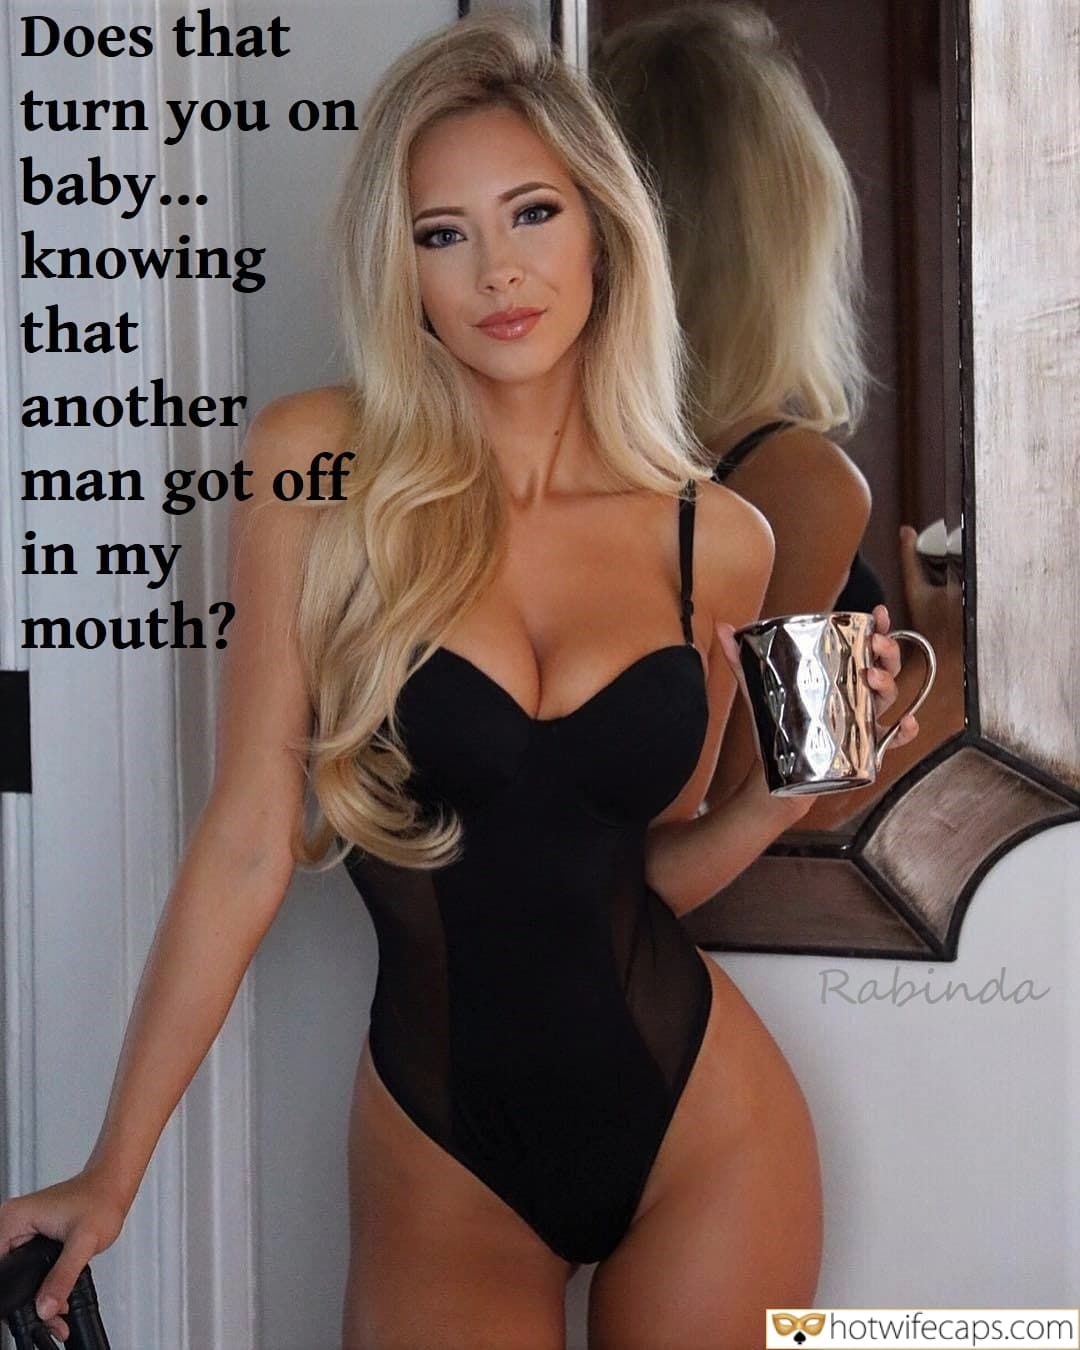 Sexy Memes My Favorite It's too big Cheating Blowjob Bigger Cock hotwife caption: Does that turn you on baby… knowing that another man got off in my mouth? Sw Is a Real Slut